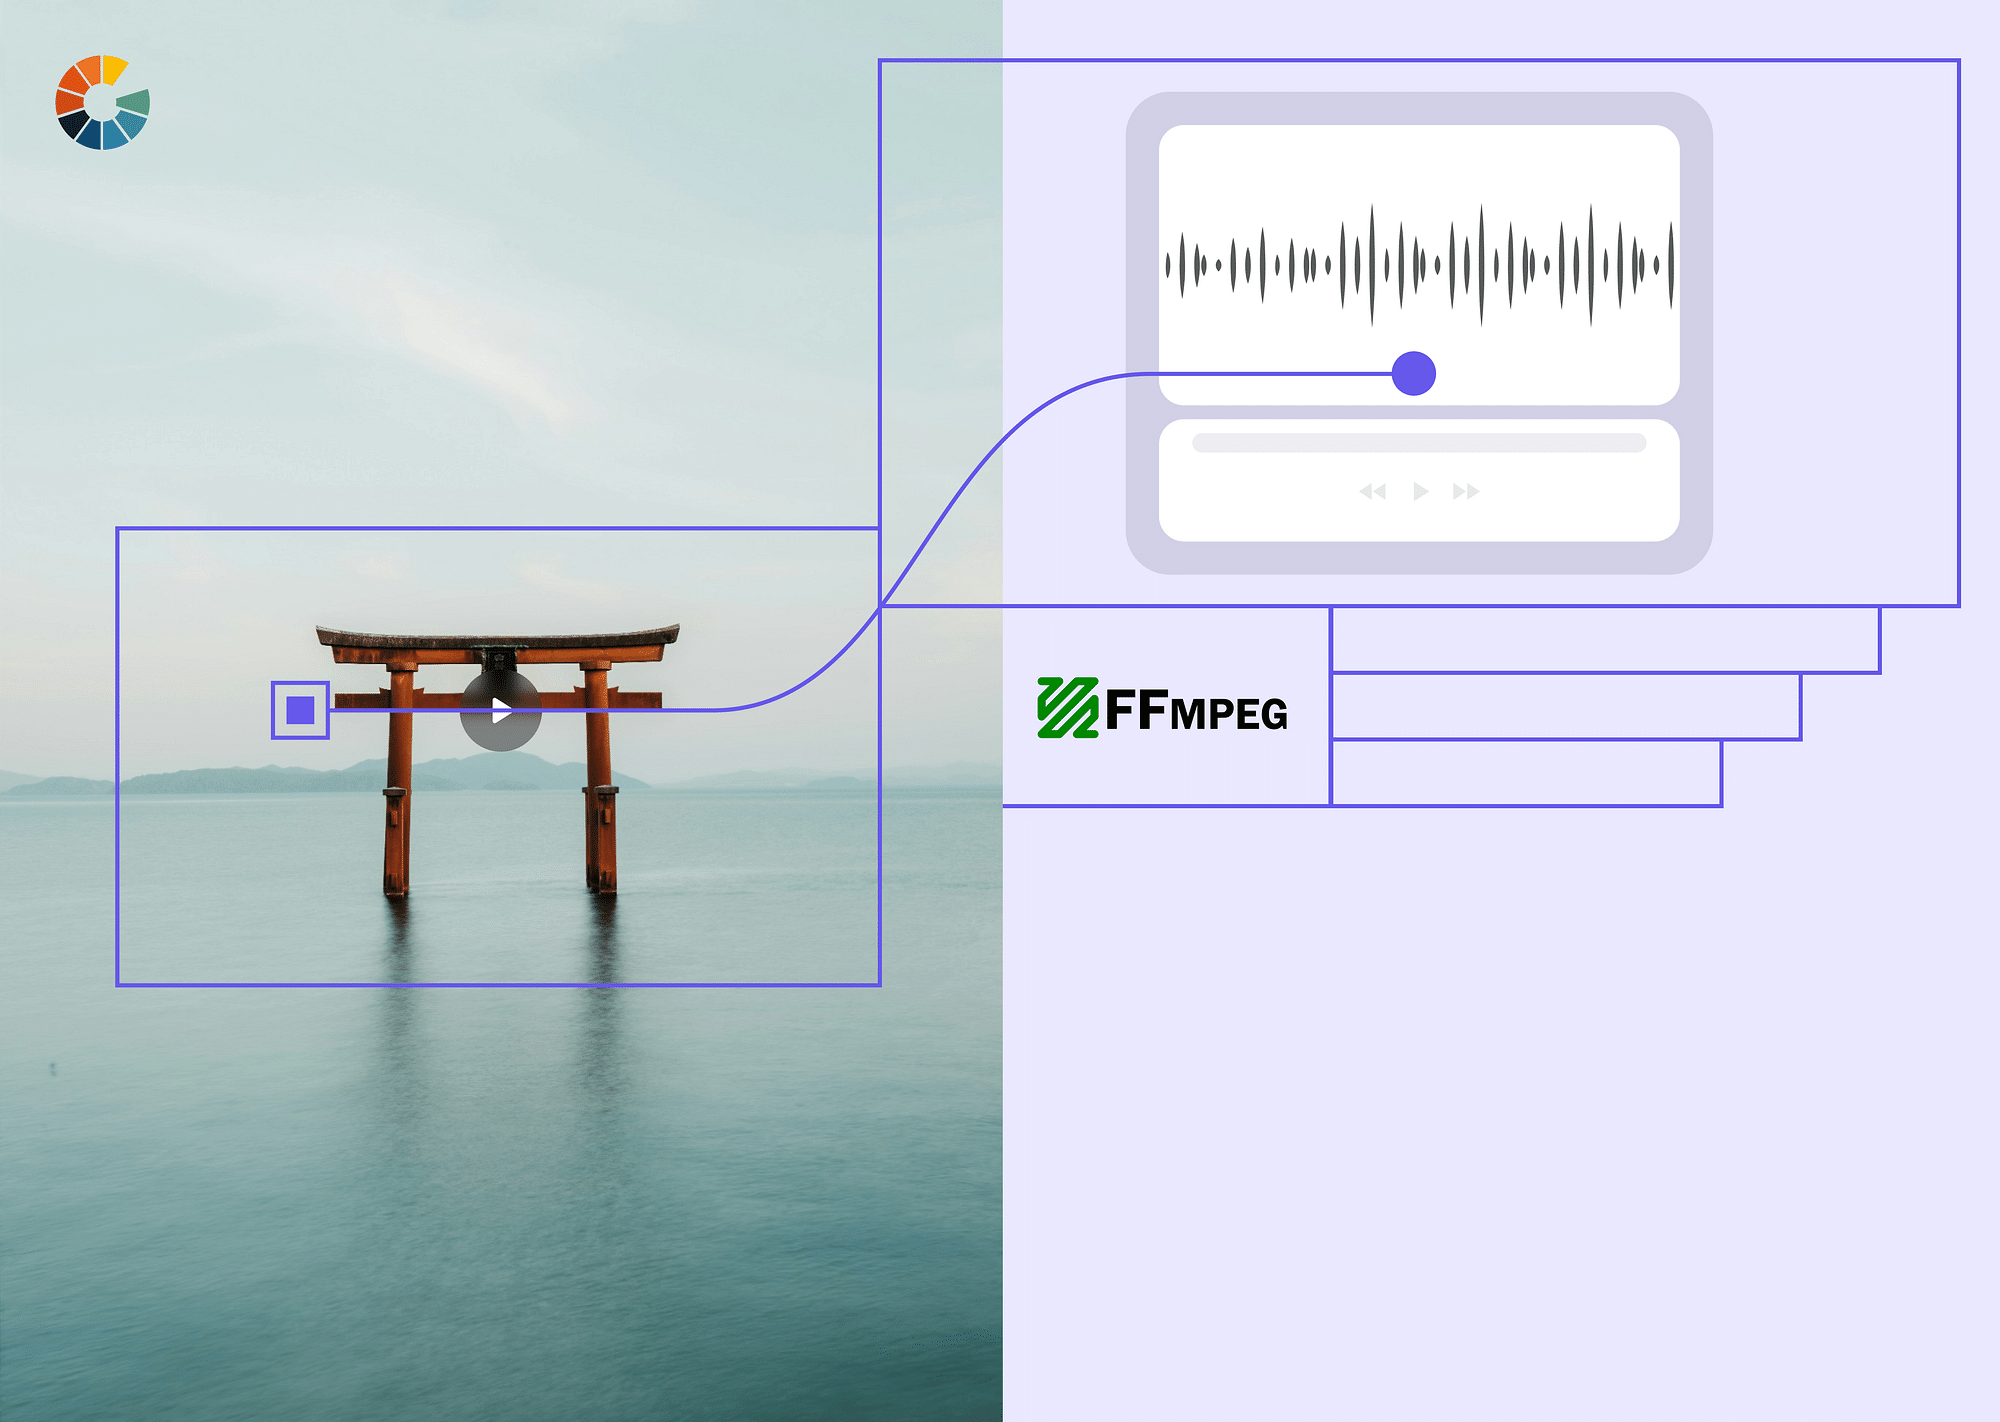 How to extract audio from video using FFmpeg?